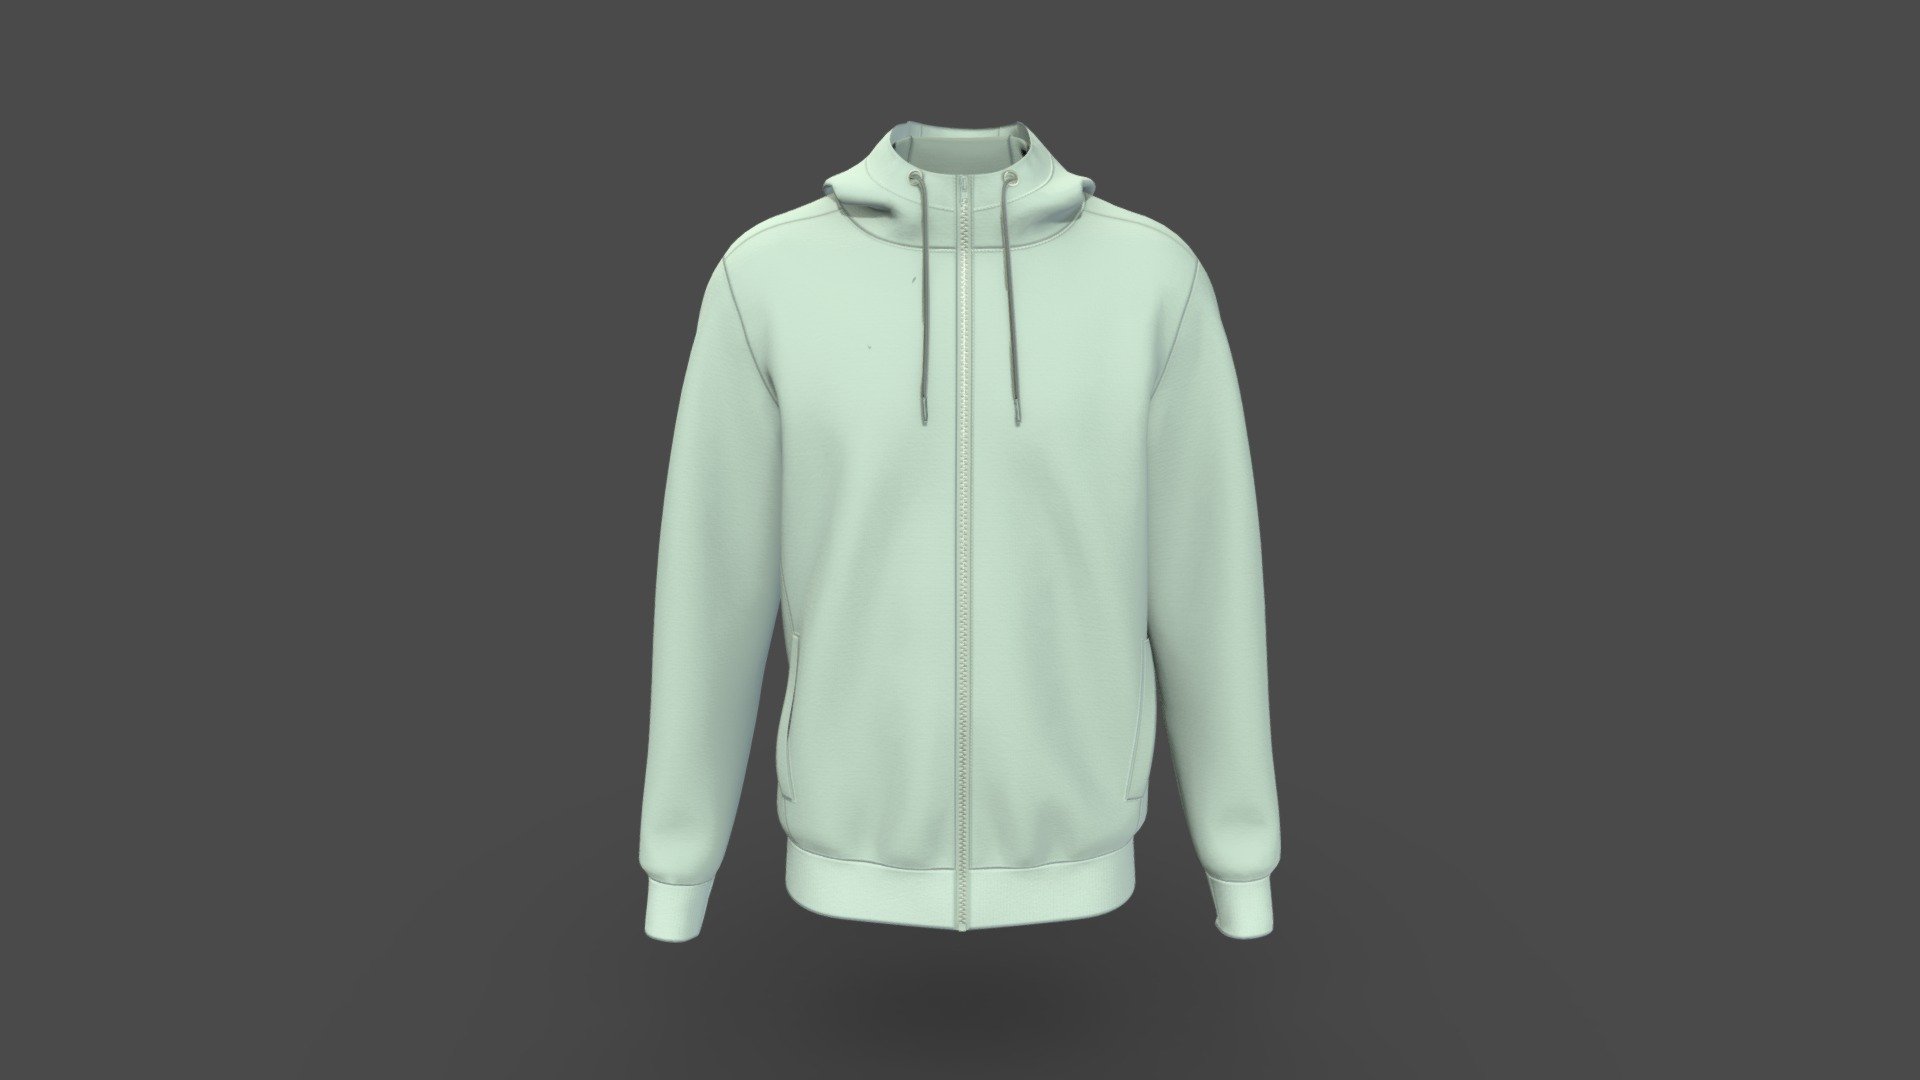 Men Classic Hooded Jacket
Version V1.0

Realistic high detailed Men Hoodie with high resolution textures. Model created by our unique processing &amp; Optimized for 3D web and AR / VR

Features

Optimized &amp; NON-Optimized obj model with 4K texture included




Optimized for AR/VR/MR

4K &amp; 2K fabric texture and print details

Optimized model is 5.02MB

NON-Optimized model is 22MB

Unit measurement of obj is cm

Knit fabric texture and print details included

GLB file in 2k texture size is 2.52MB

GLB file in 4k texture size is 6.91MB  (Game &amp; Animation Ready)

Unit measurement of glb is meter

Suitable for web application configurator development.

Fully unwrap UV

The model has 1 material

Includes high detailed normal map

Unit measurment was inch

Triangular Mesh with 28k Vertices

Texture map: Base color, OcclusionRoughnessMetallic(ORM), Normal

Tpose  available on request

For more details or custom order send email: hello@binarycloth.com


Website:binarycloth.com - Men Classic Hooded Jacket - Buy Royalty Free 3D model by BINARYCLOTH (@binaryclothofficial) 3d model